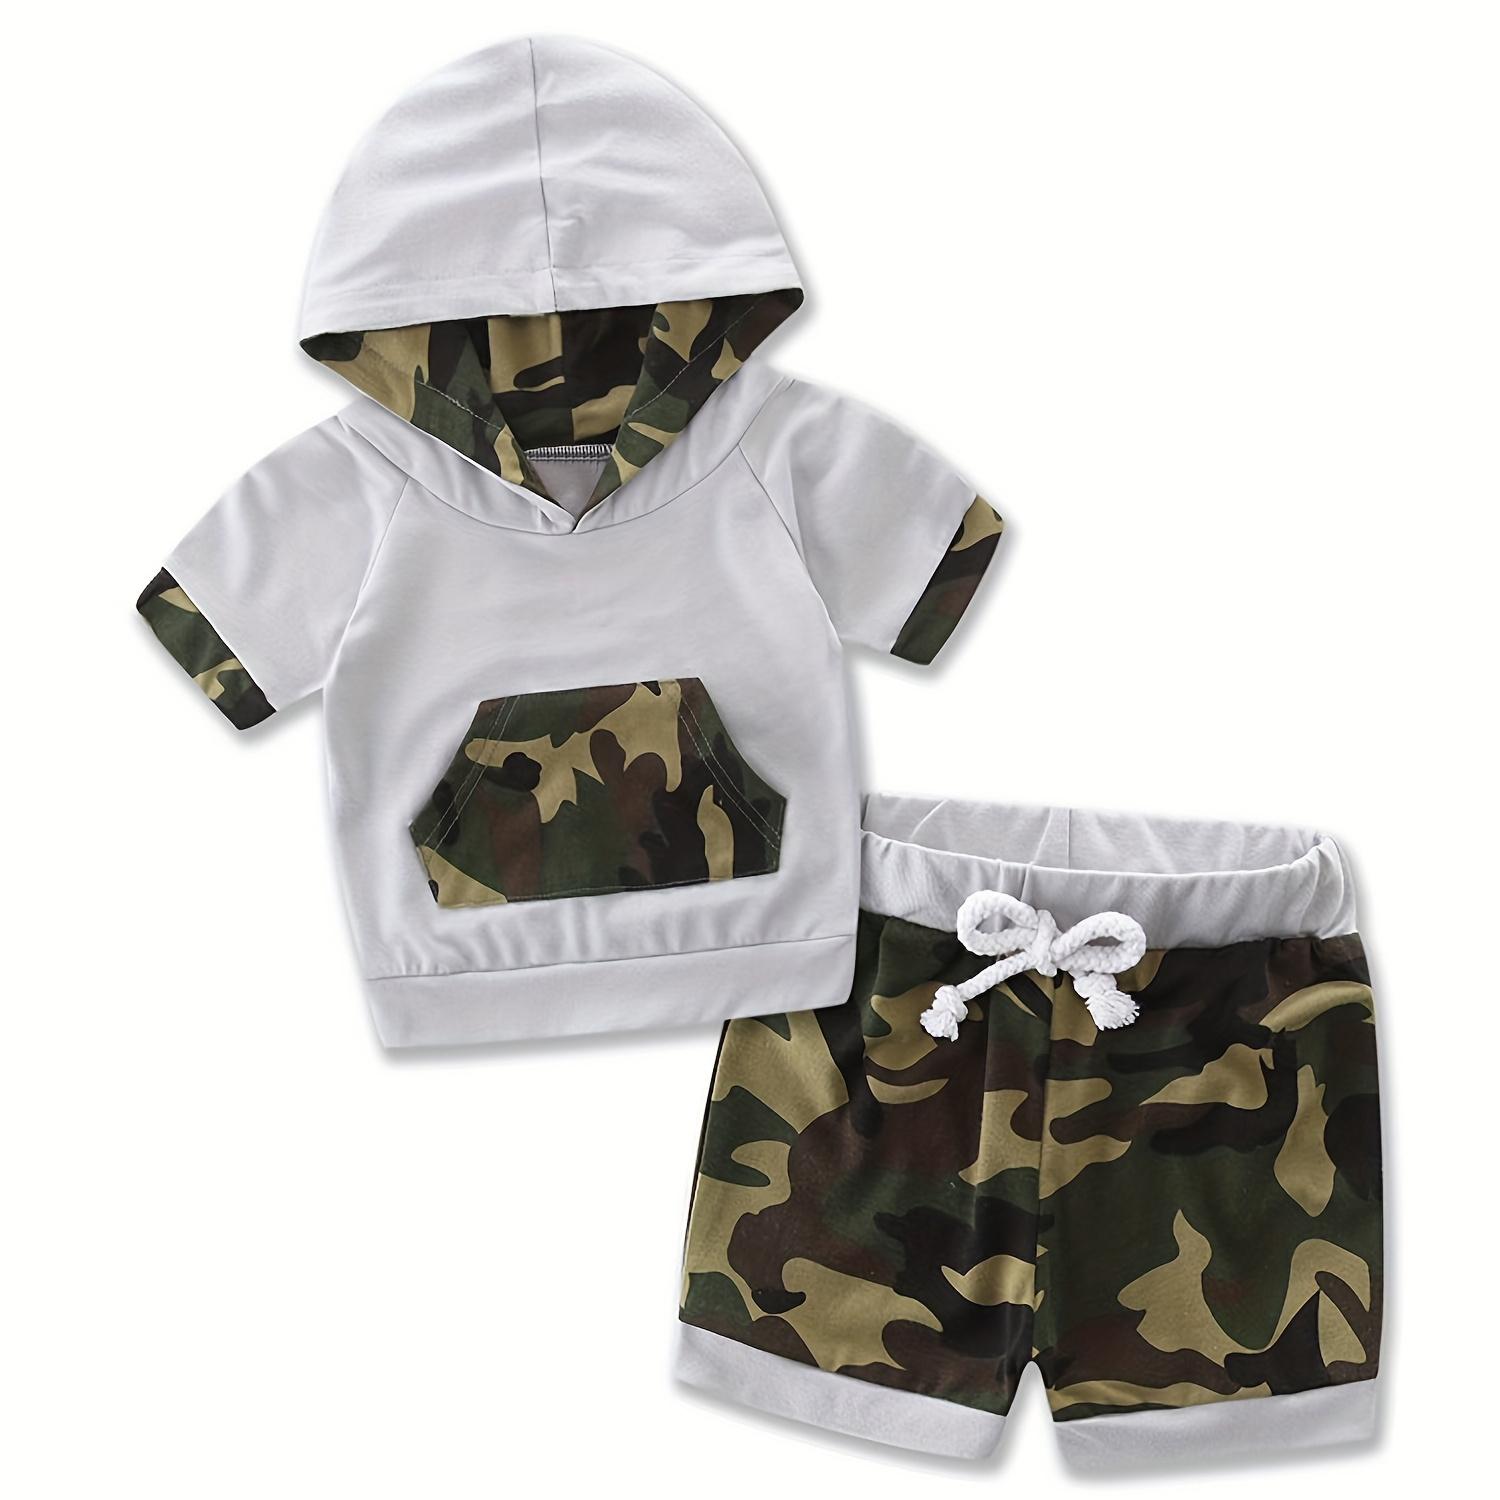 

2pcs Baby Boy's Cotton Summer Outfit, Short Sleeve Camouflage Hooded Sweatshirt With Matching Shorts, Casual Style, Infant Toddler Clothing Set